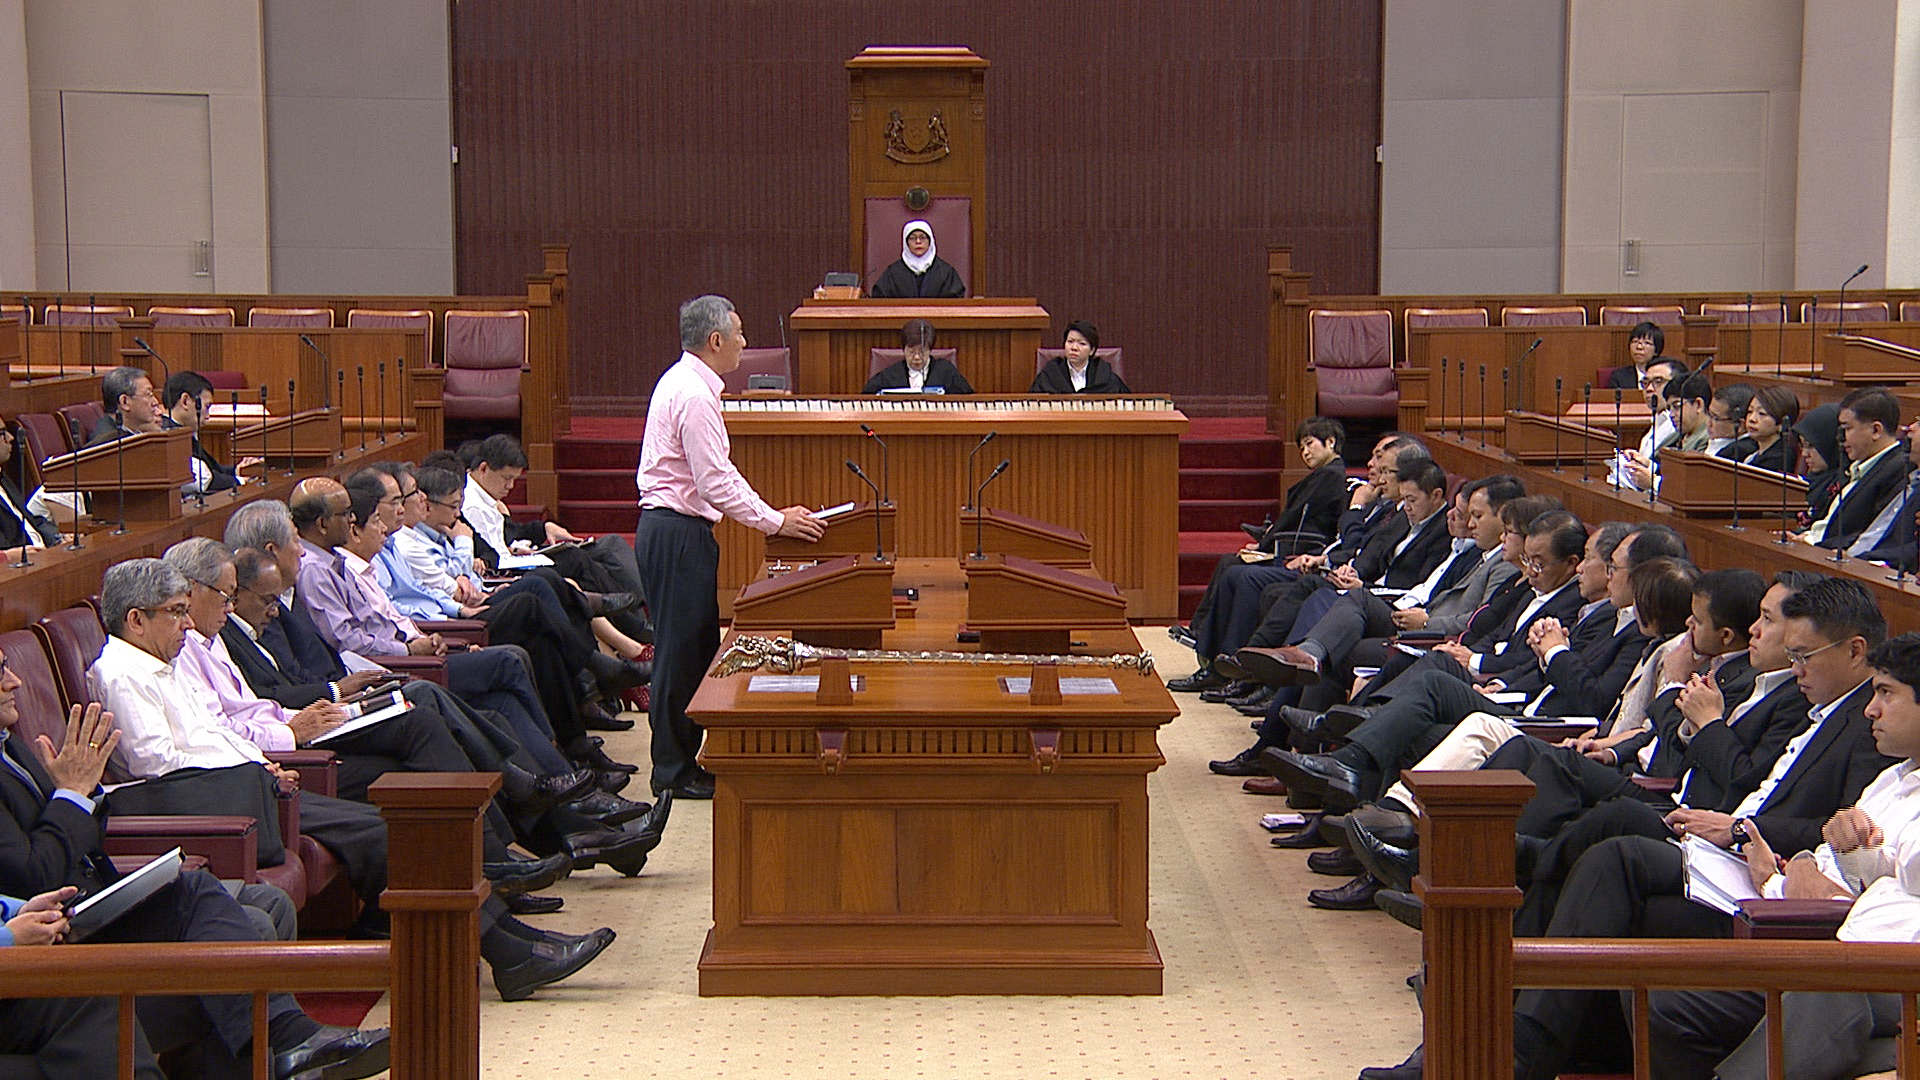 PM Lee Hsien Loong at the Parliamentary Debate on the Constitution (Amendment) Bill 